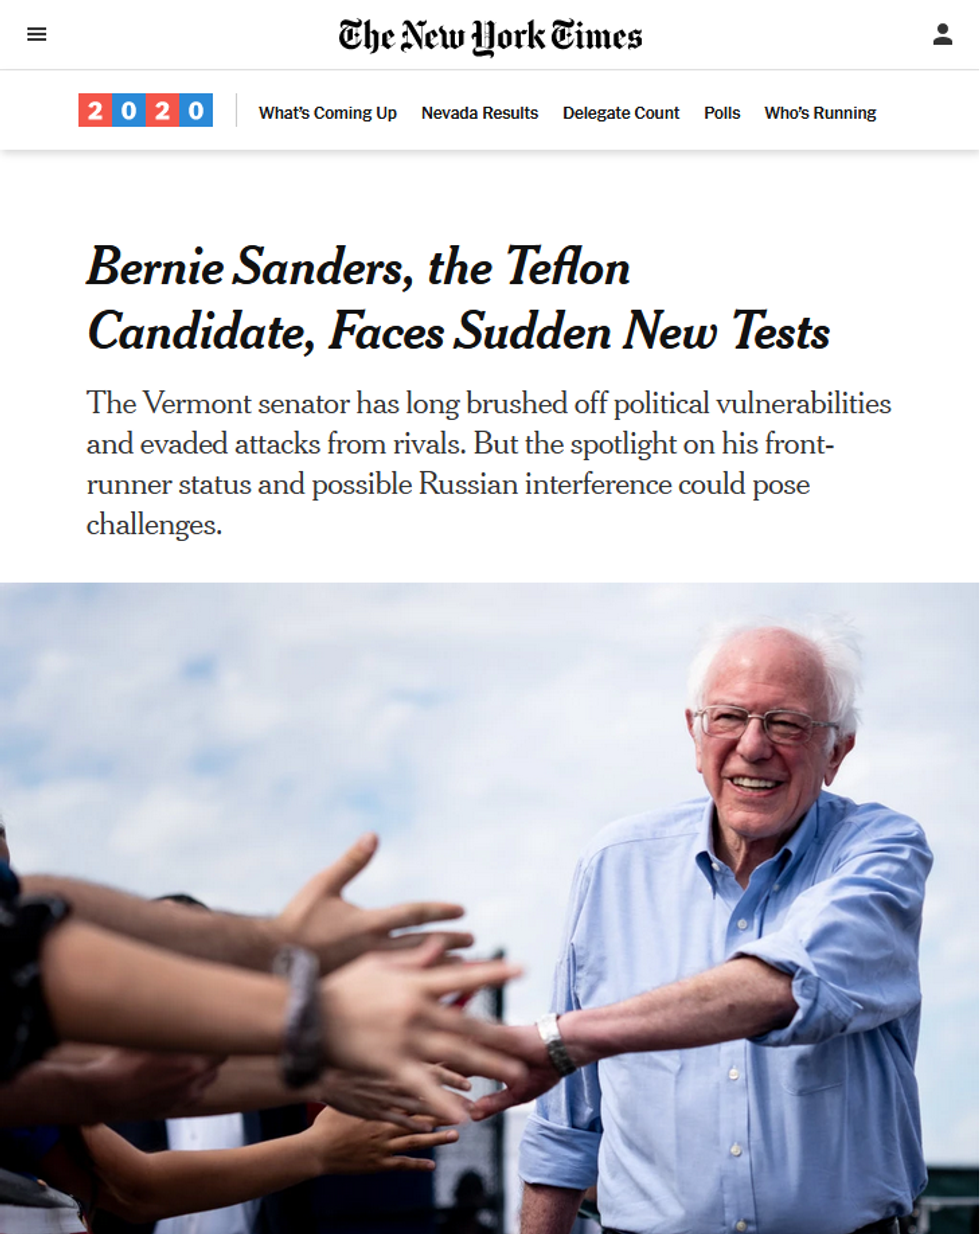 NYT: Bernie Sanders, the Teflon Candidate, Faces Sudden New Tests